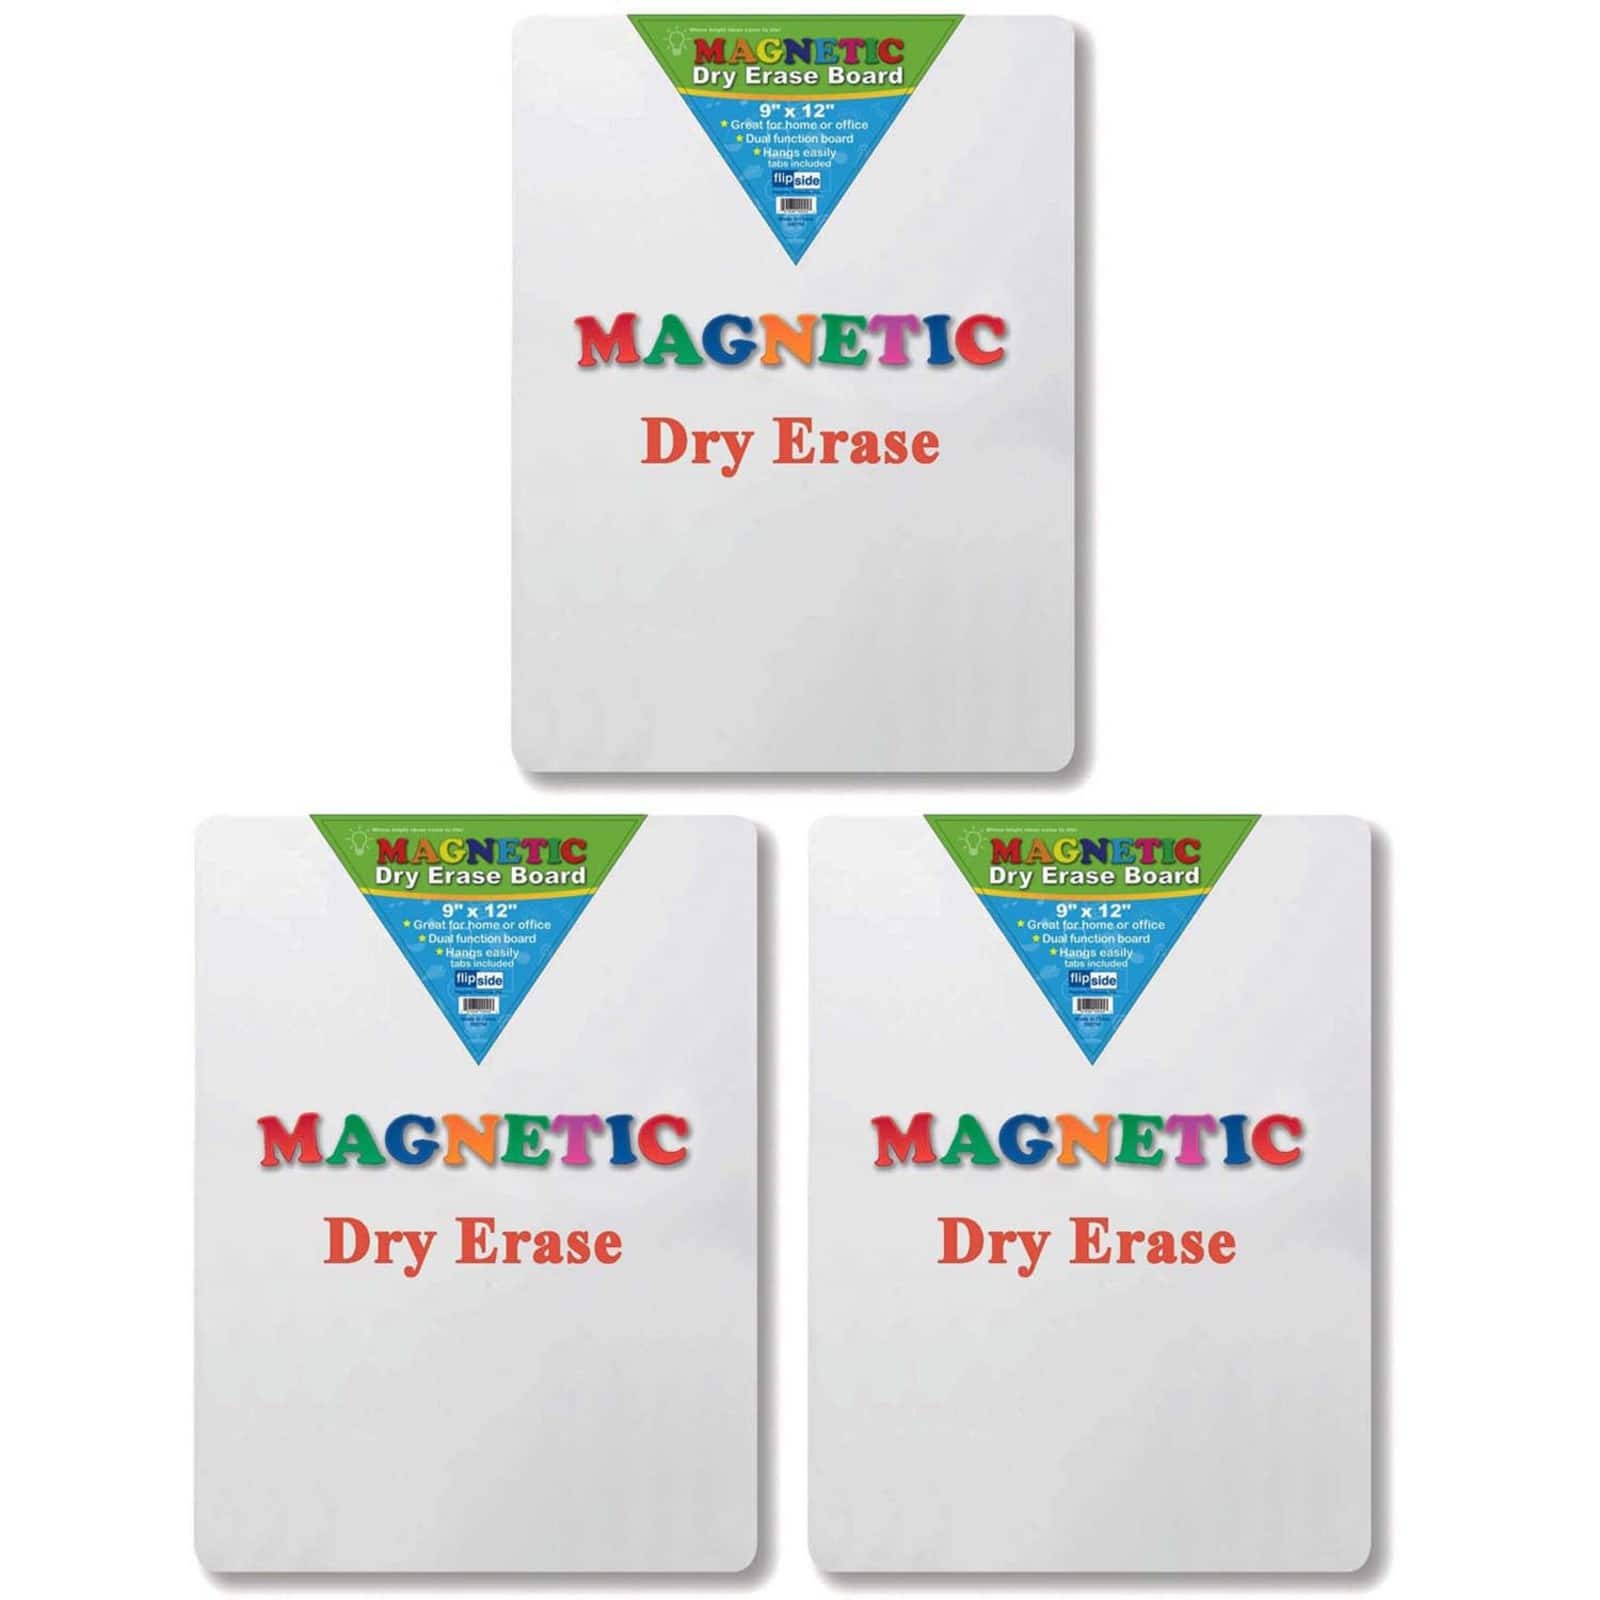 Flipside Products 9&#x22; x 12&#x22; Magnetic Dry Erase Boards, 3ct.